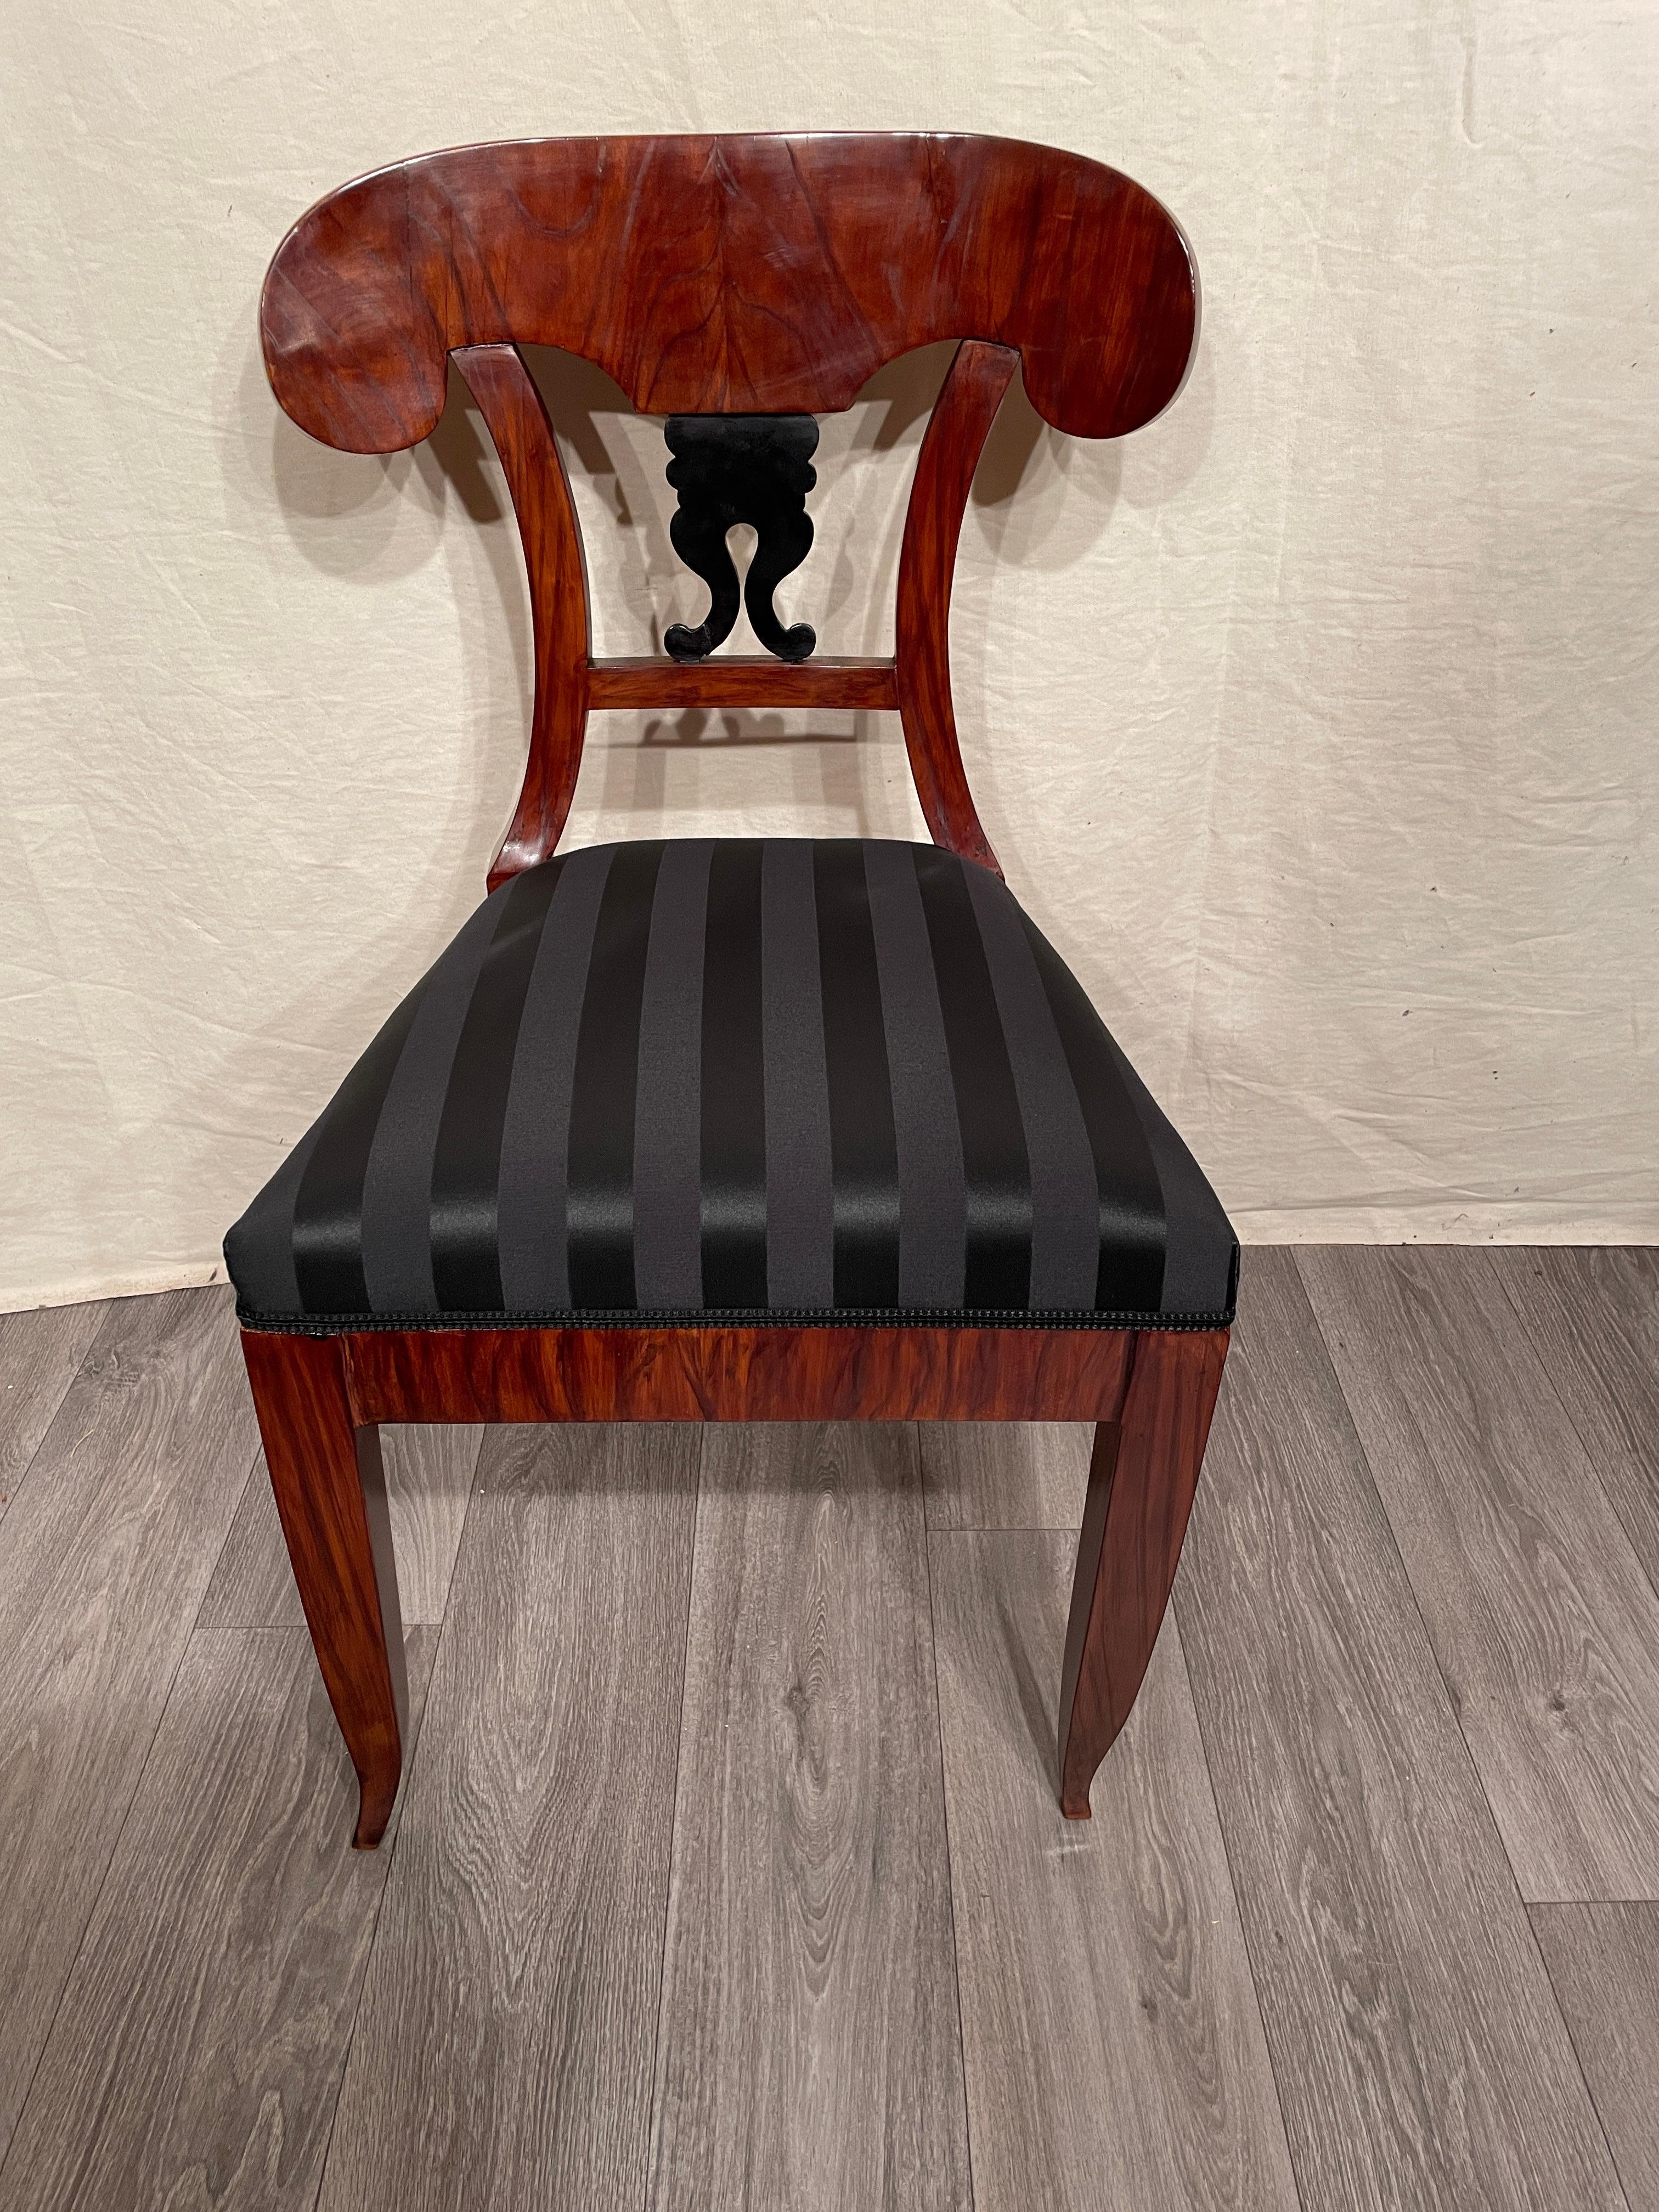 Biedermeier Chair, South German 1820. 
Beautiful walnut veneer embellishes this original Biedermeier chair. The back is decorated with an ebonized volute motif. The chair has been professionally refinished and shellack polished. It has new